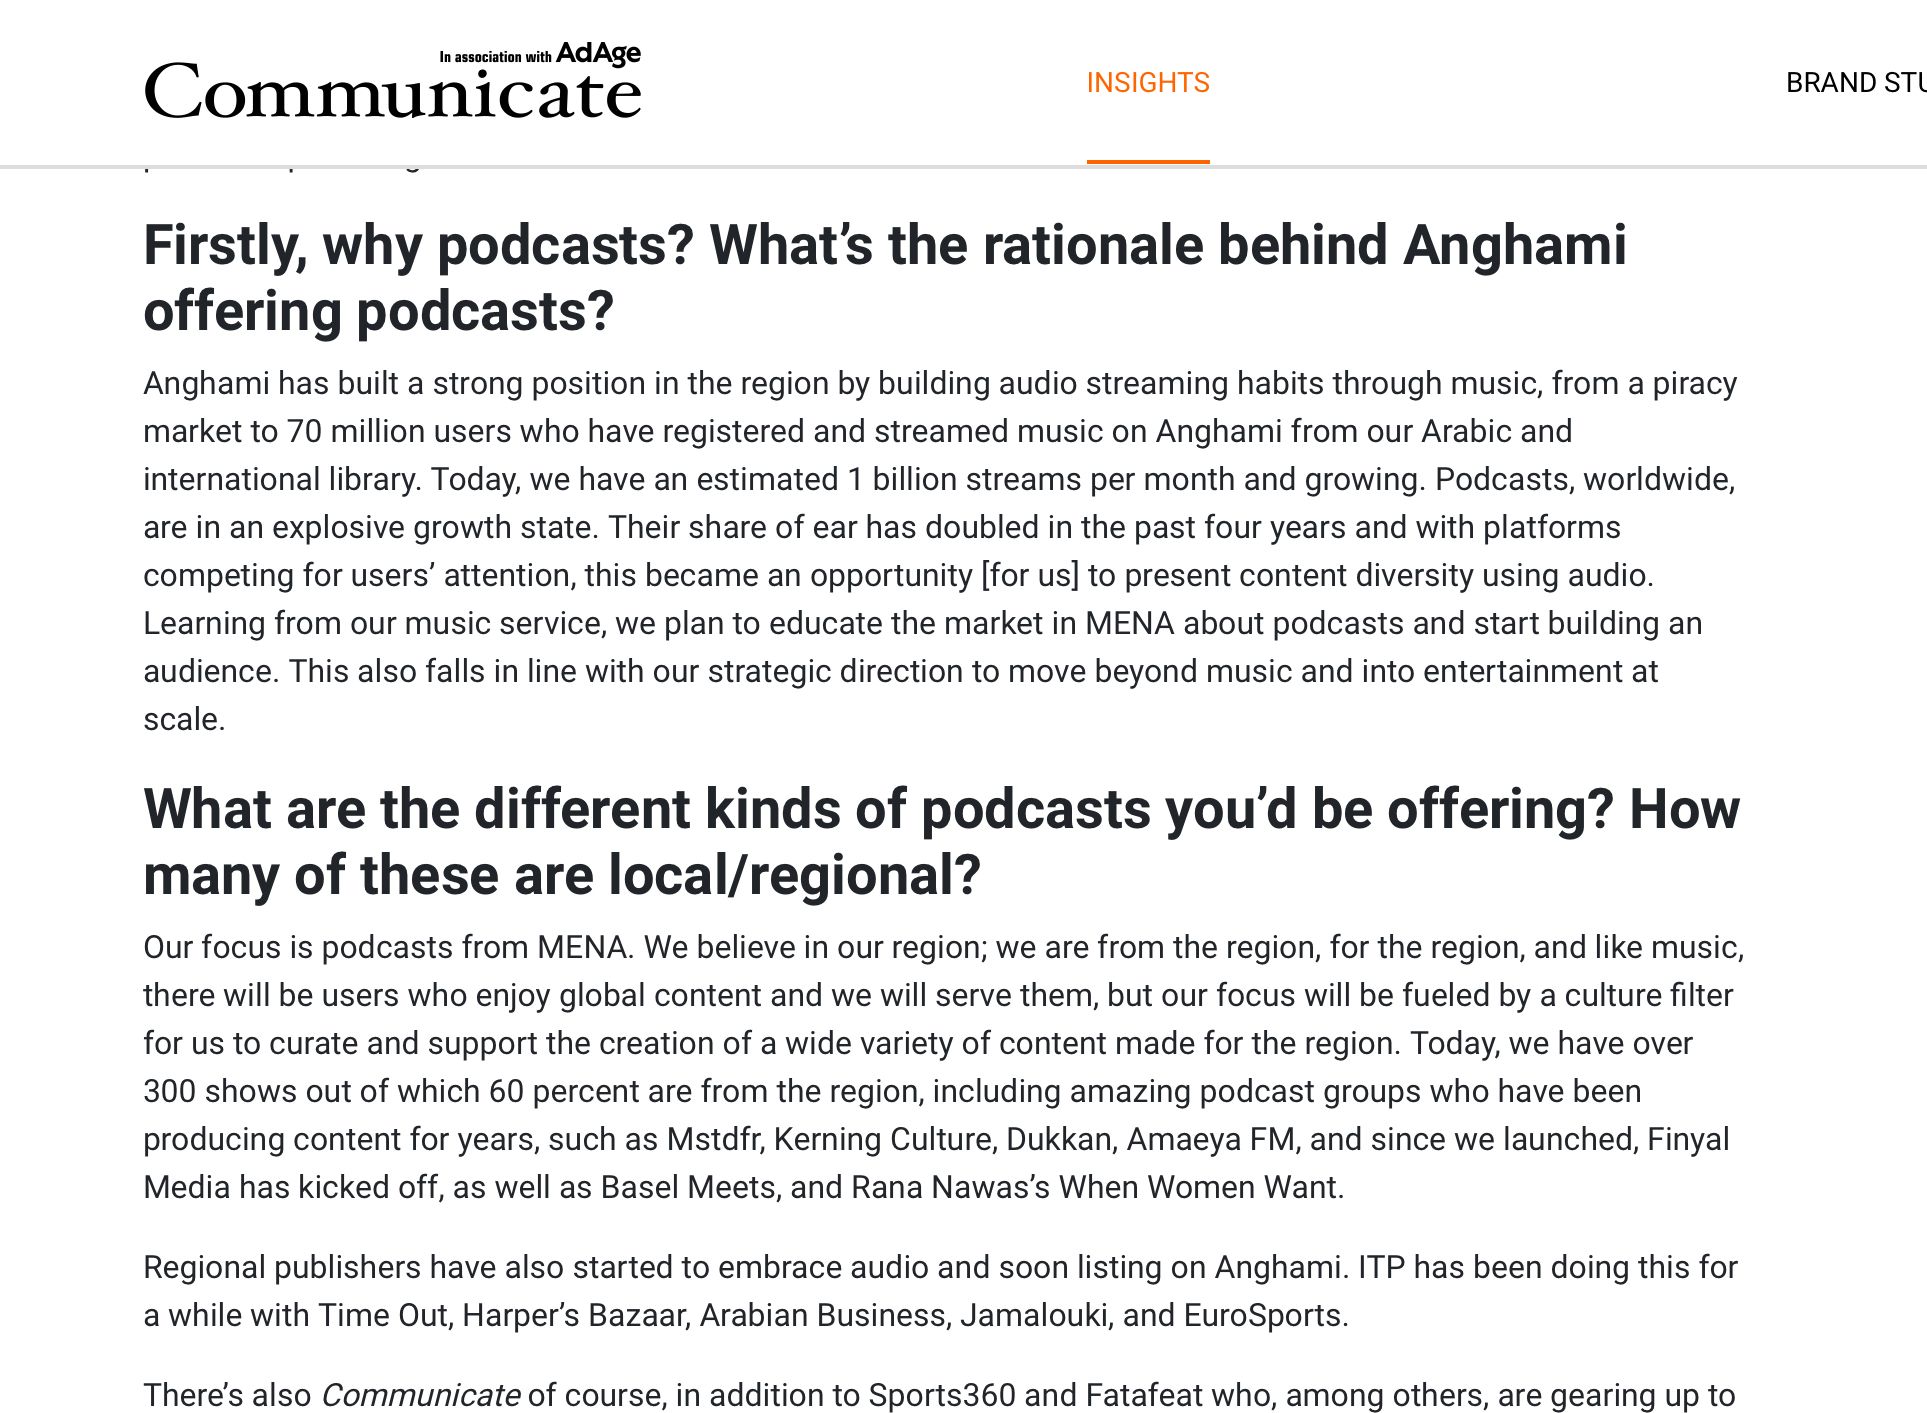 Anghami on audio and podcasts